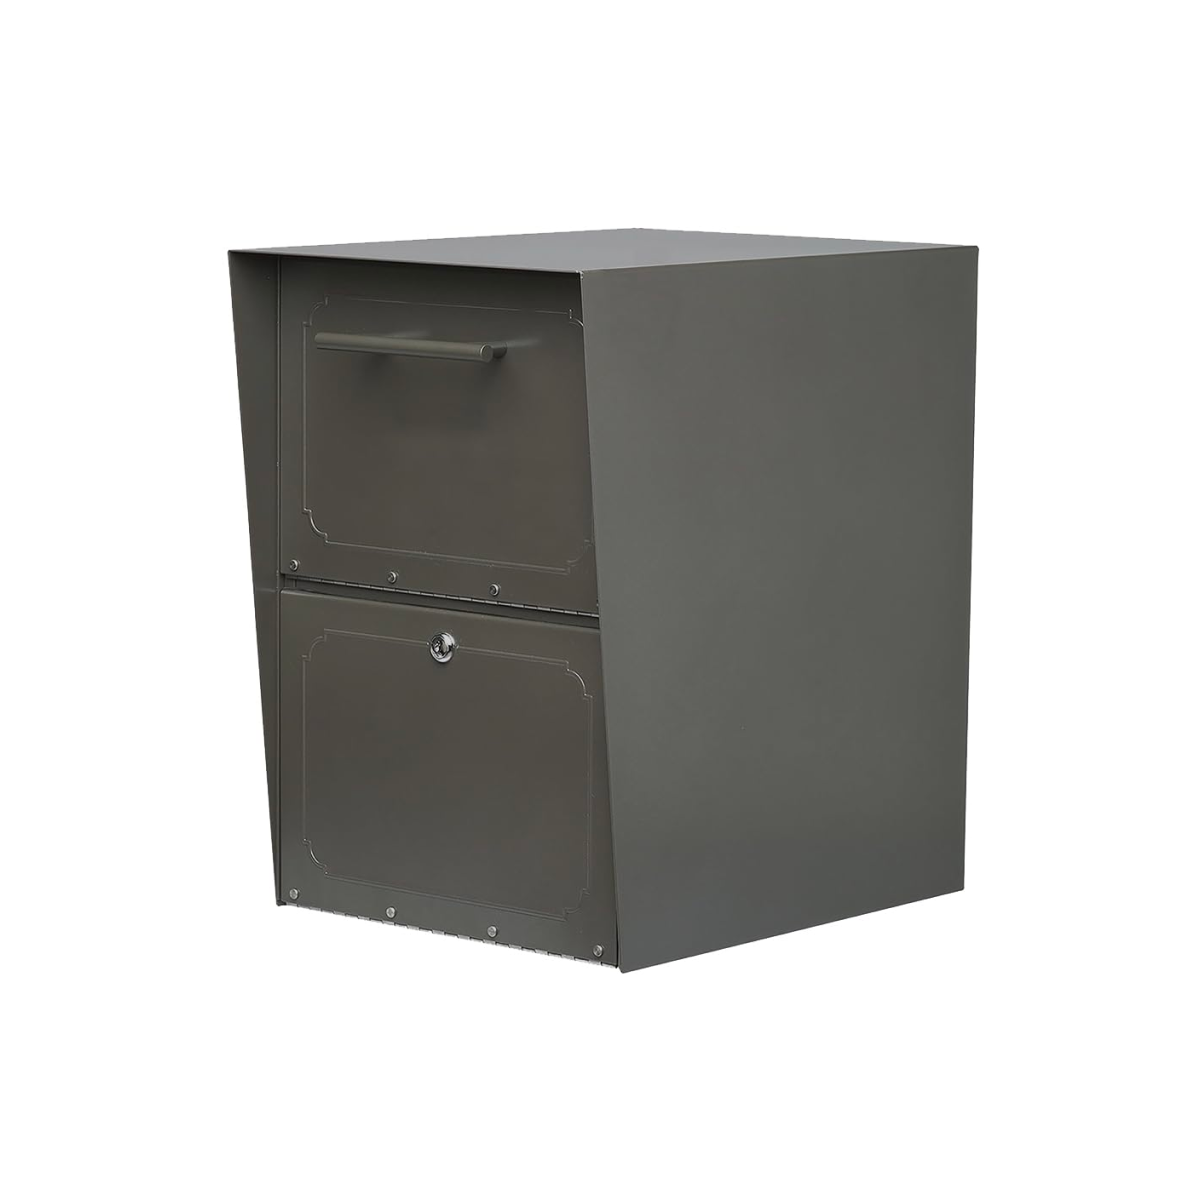 Oasis Drop Box Commercial Mailboxes Product Image